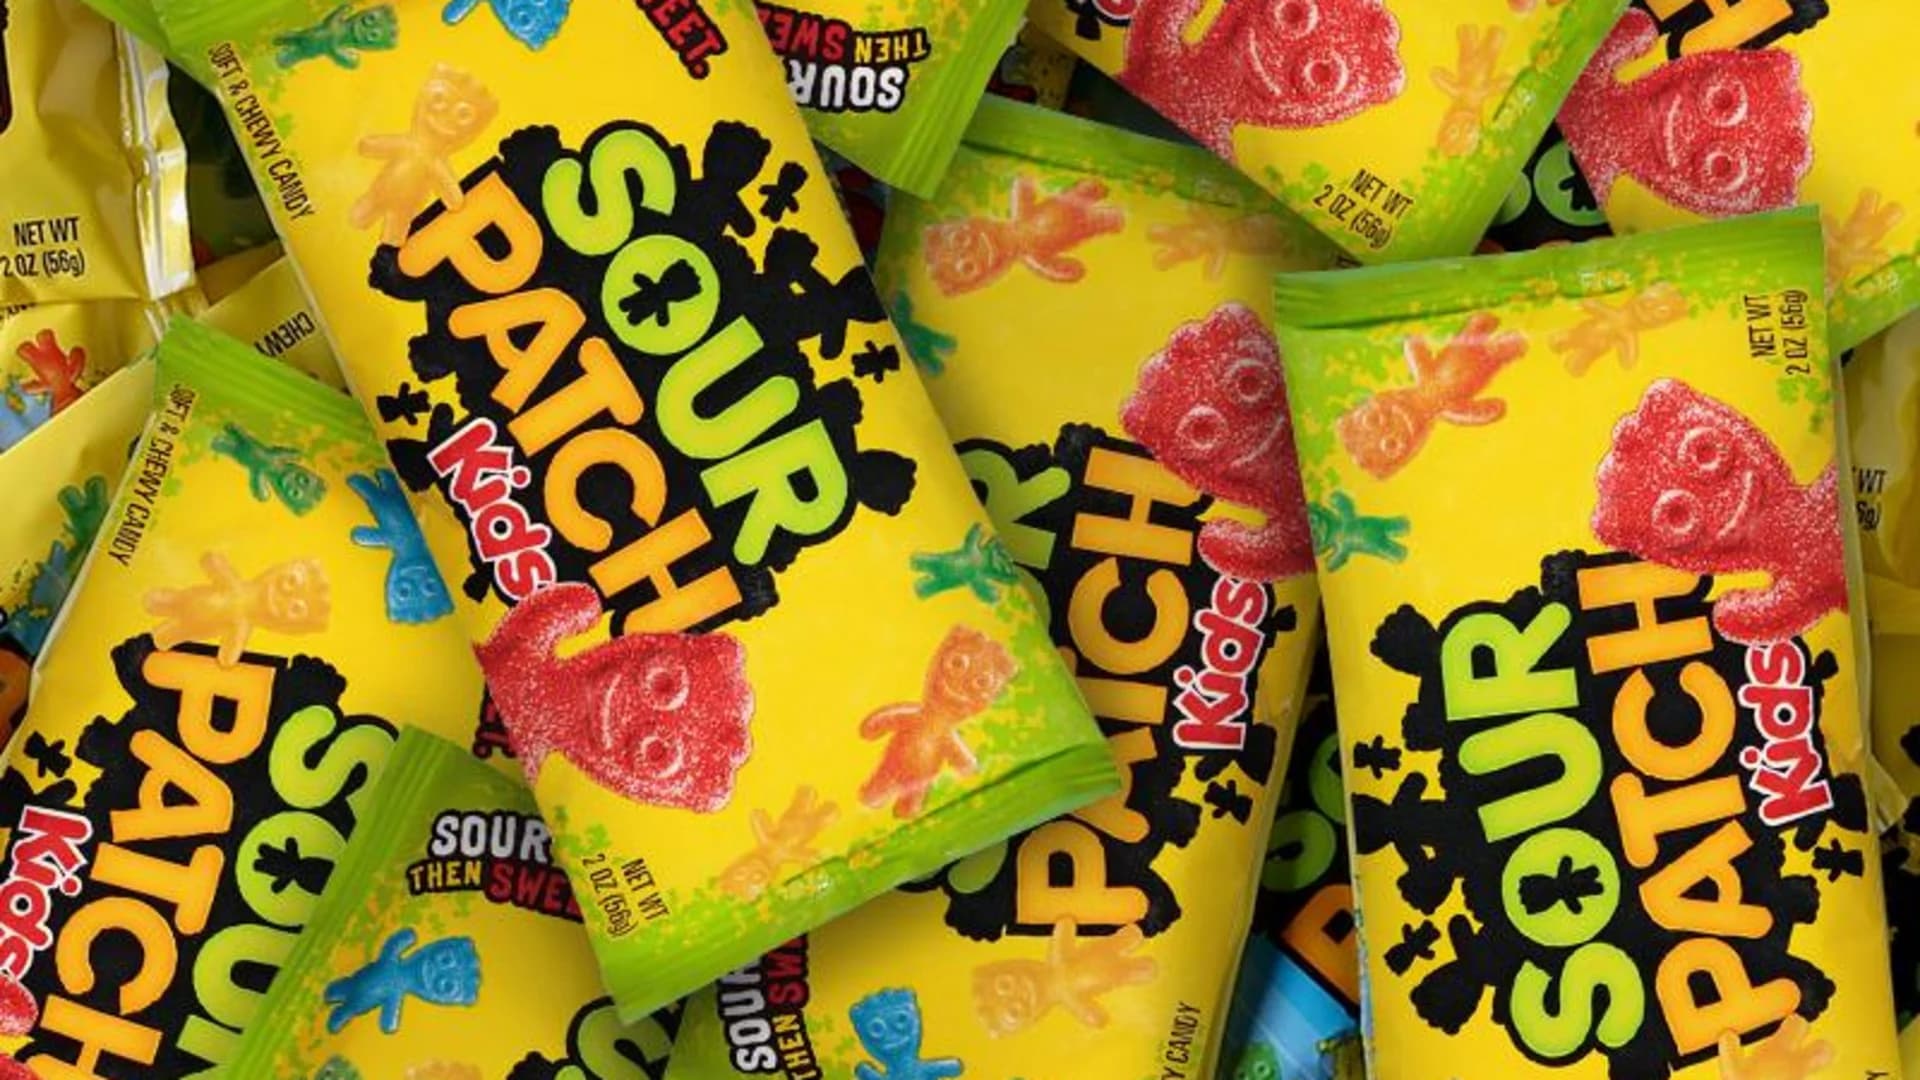 Poll: National Sour Candy Day